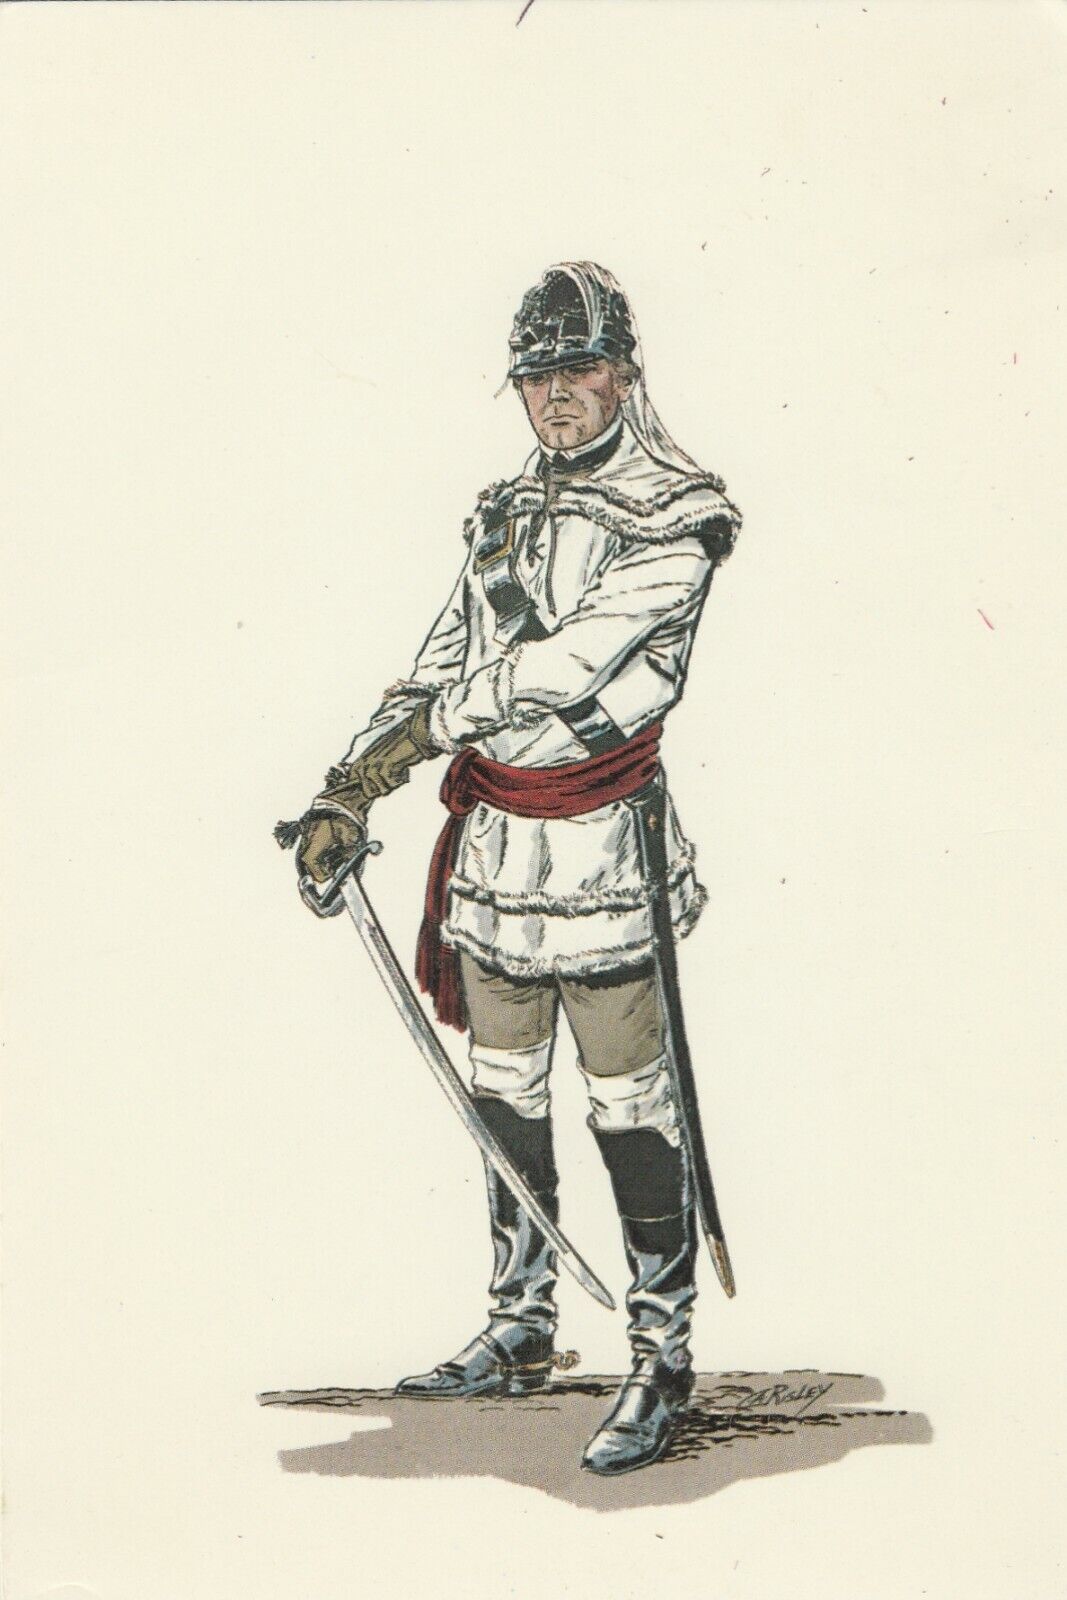 Vintage Military Postcard  OFFICER, 1778  BAYLOR\'S DRAGOONS   UNPOSTED